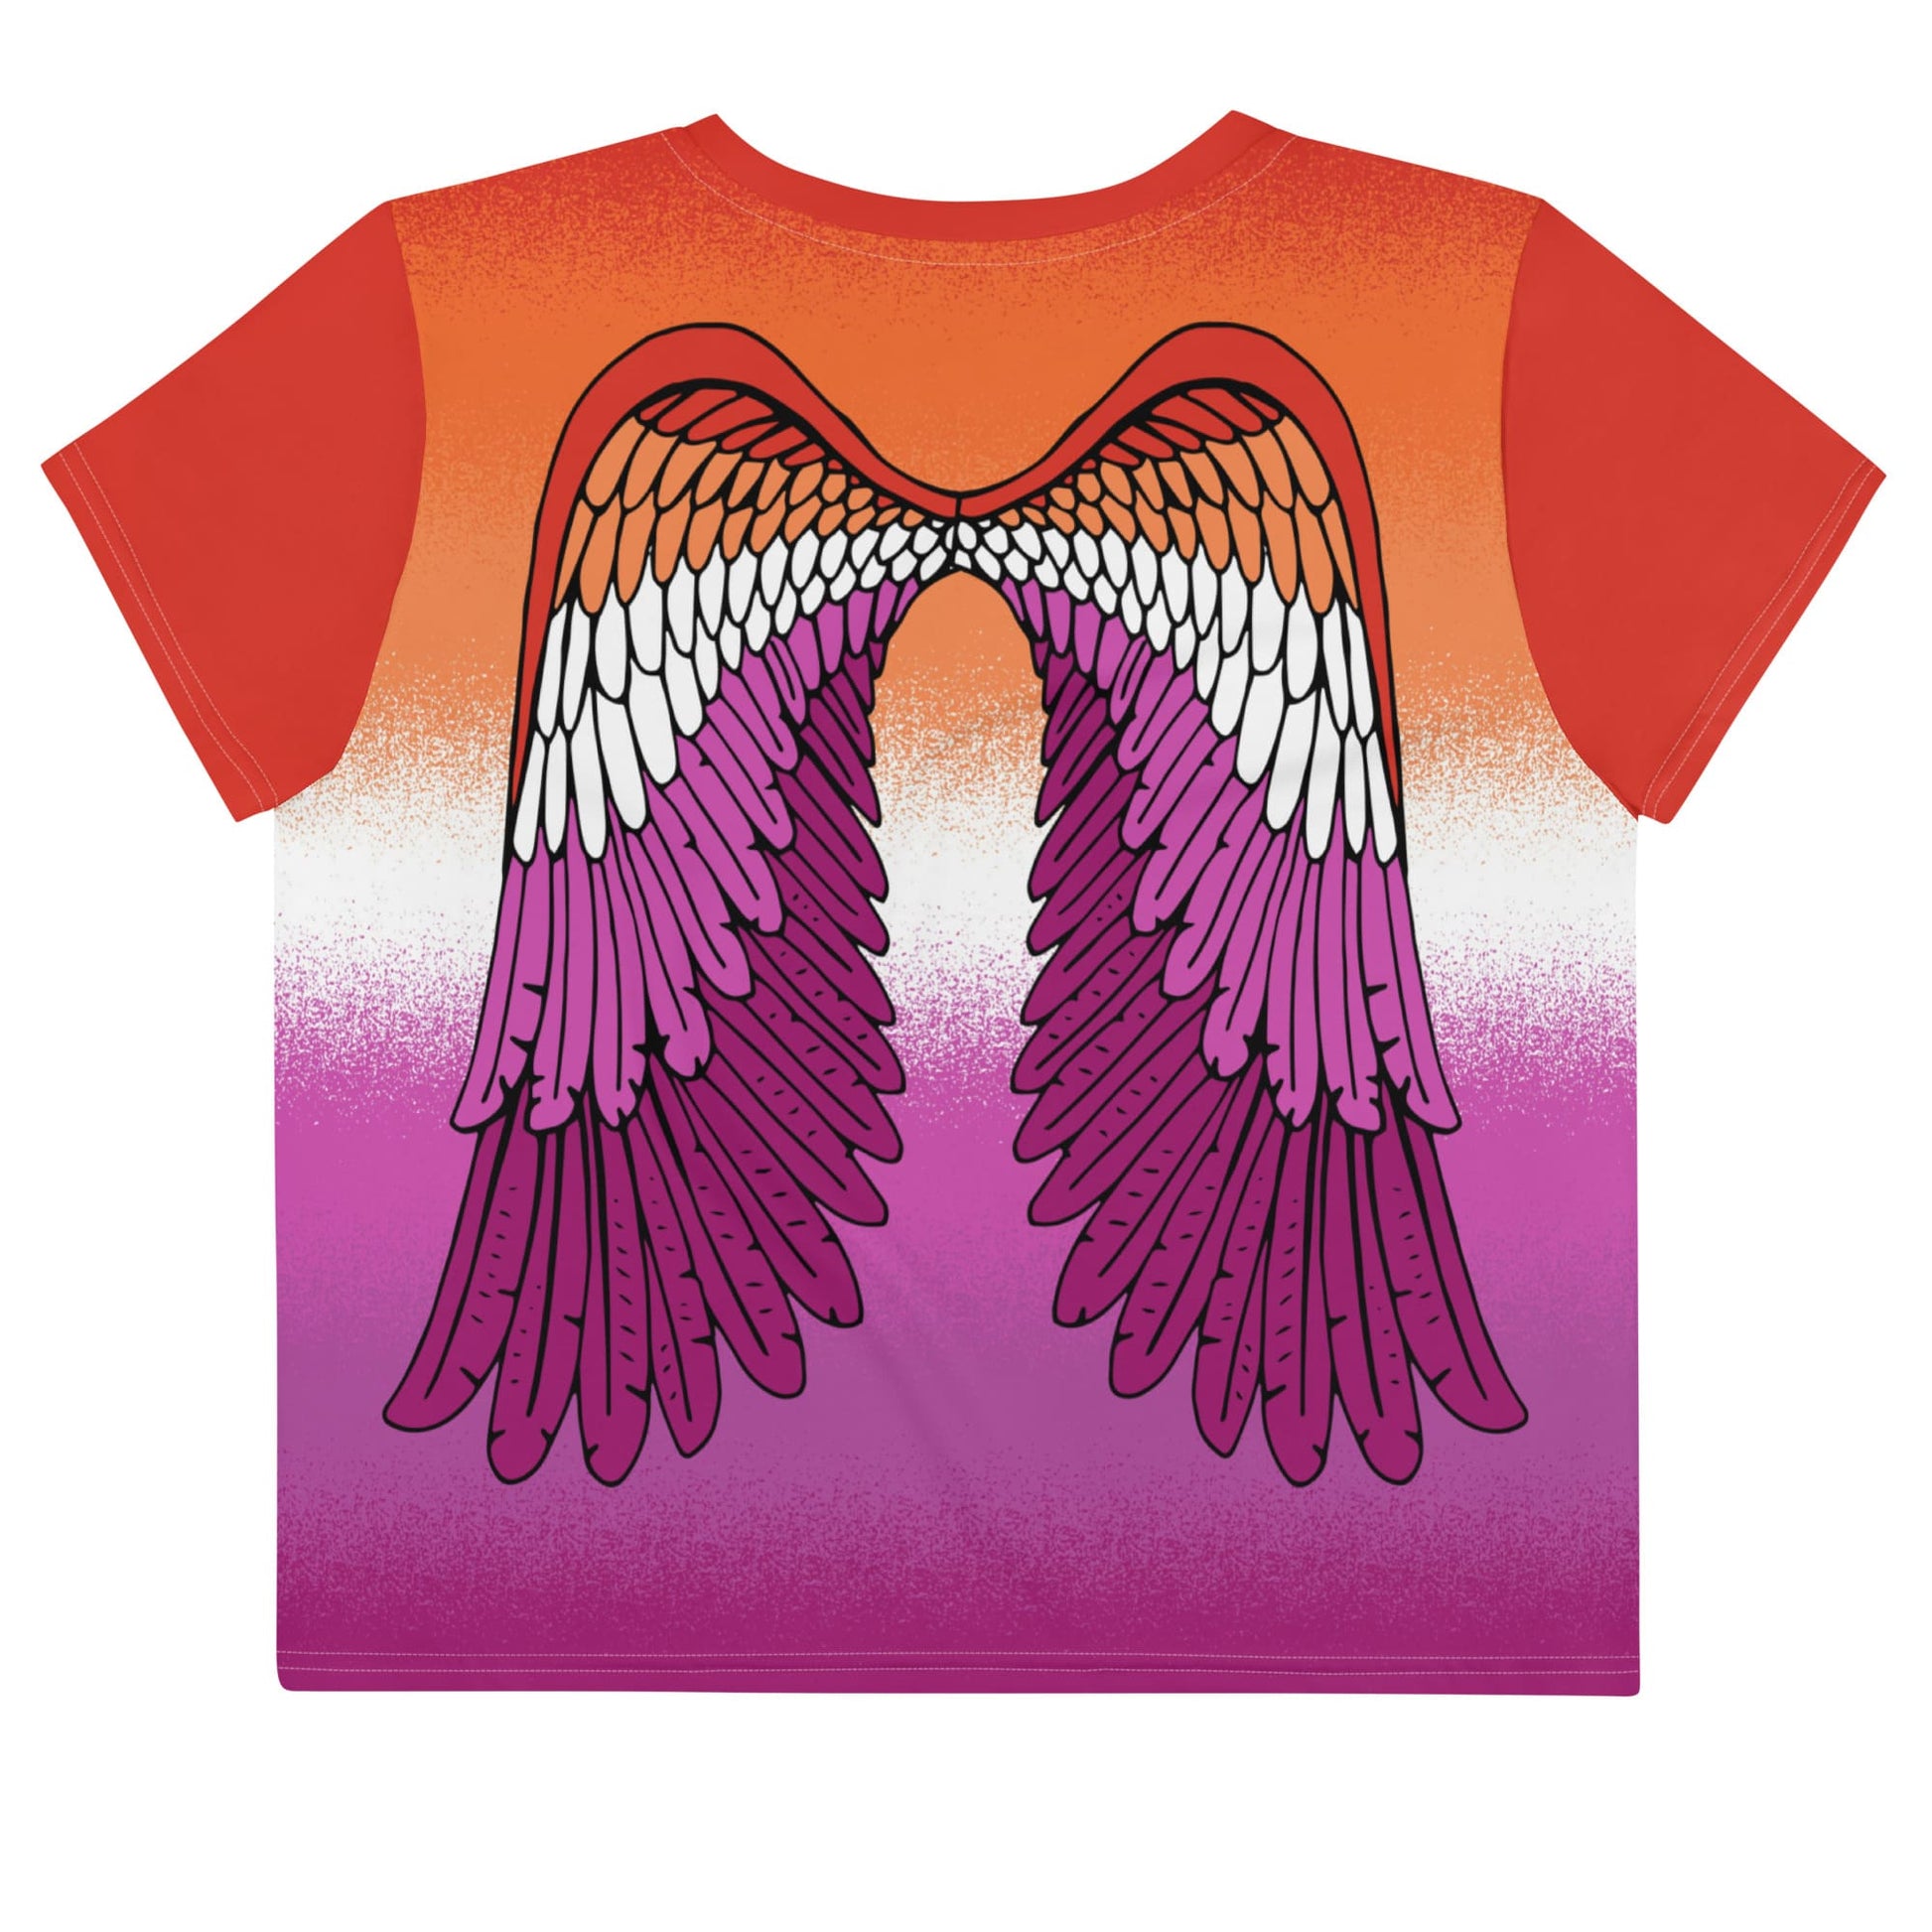 lesbian crop top, sunset flag cropped shirt with wings on back, flatlay back